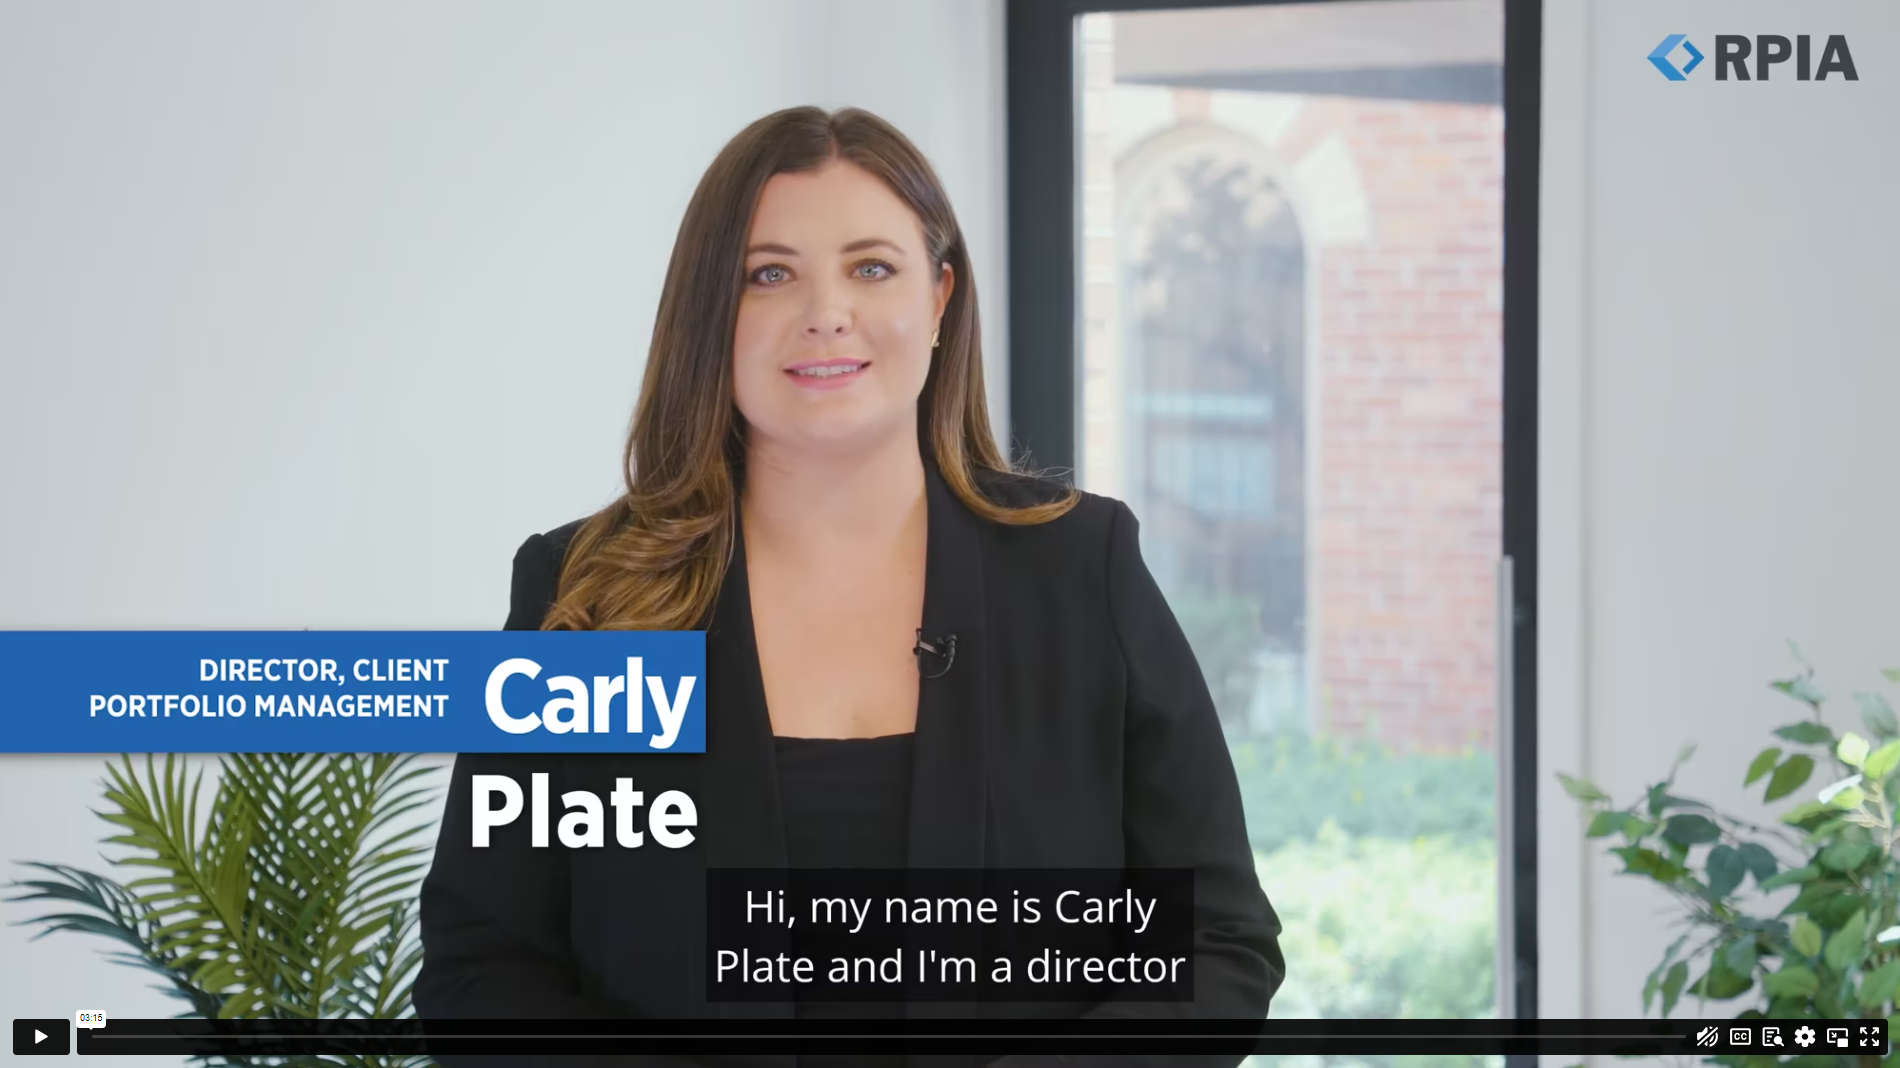 Carly Plate standing in front of a window with plants in the background